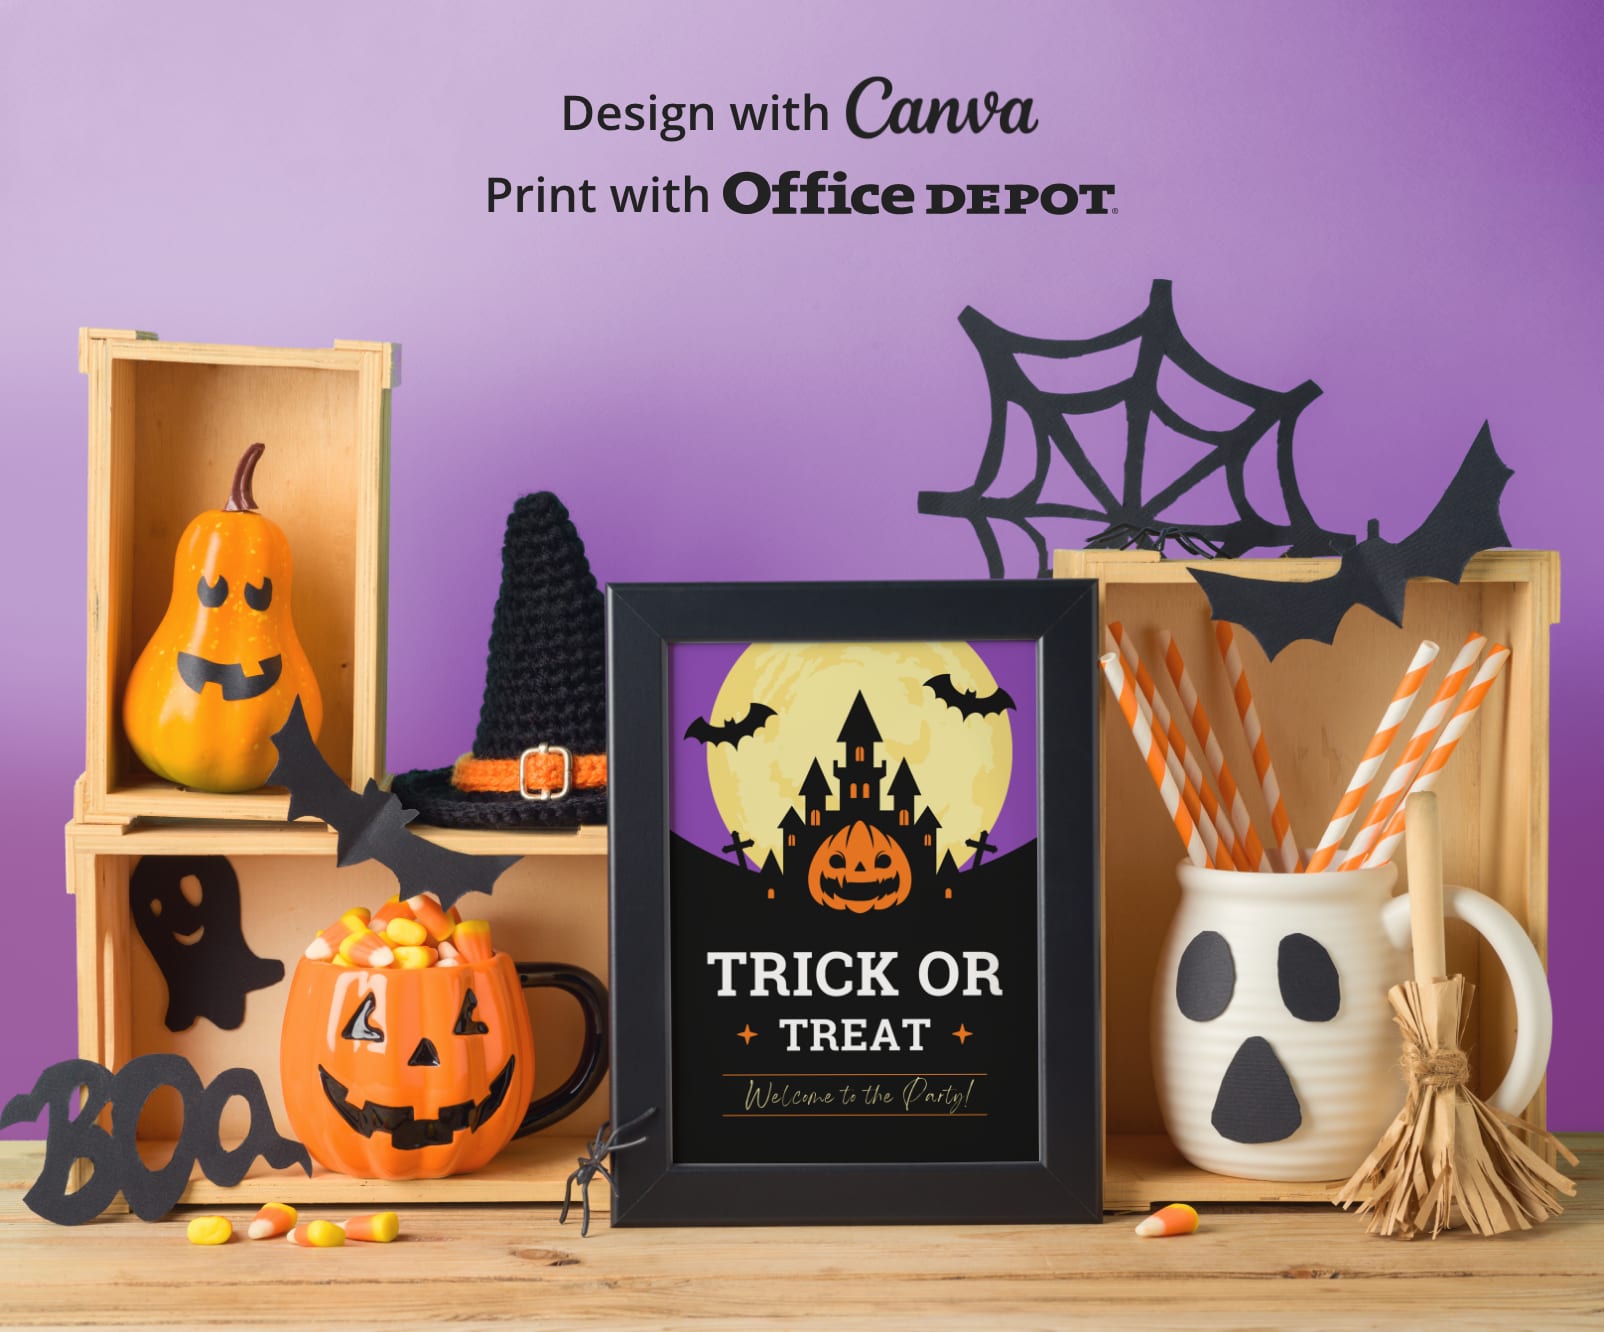 https://media.officedepot.com/image/upload/f_auto,c_limit,w_1920,q_auto/v1694723778/CREATIVE/CREATIVE_2023/SITE/WWW/AEM%20Pages/Halloween/CPD_5_Col